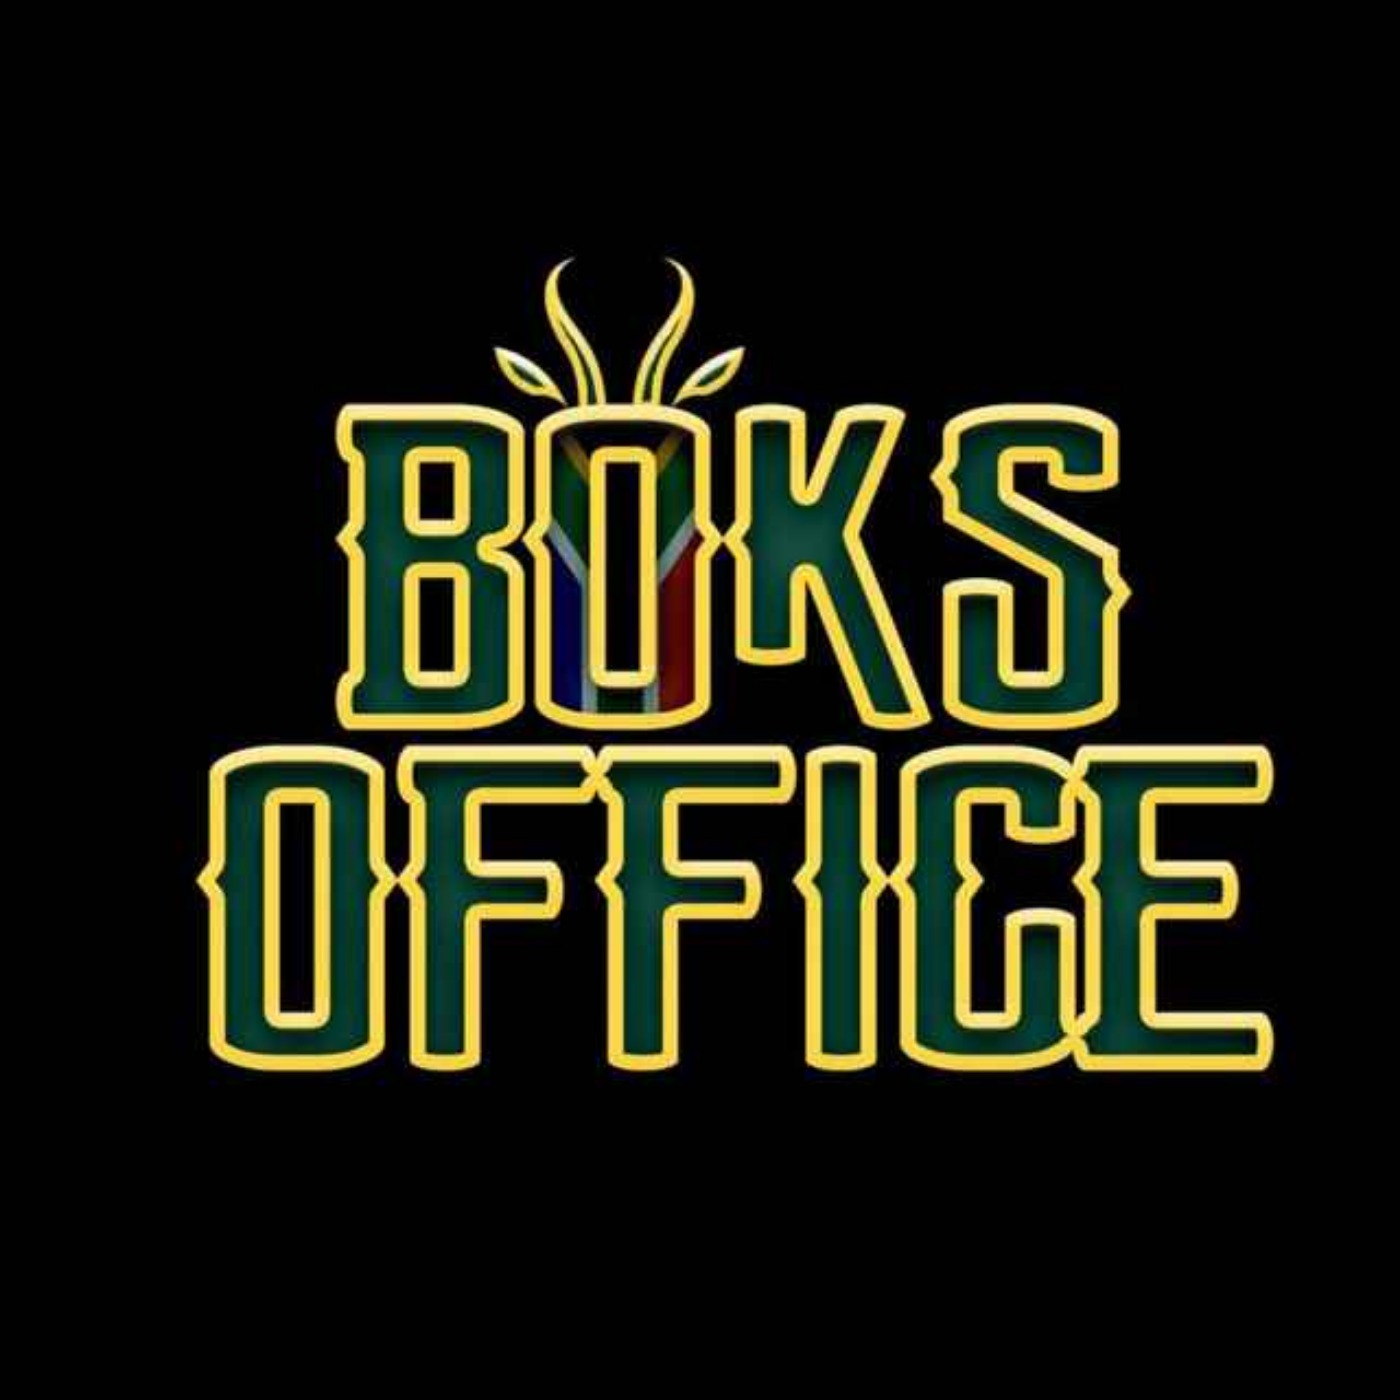 Boks Office - Episode 2 - Damian Willemse on Tattoos, World Cup Celebrations & Whether He'd Play At The Olympics?